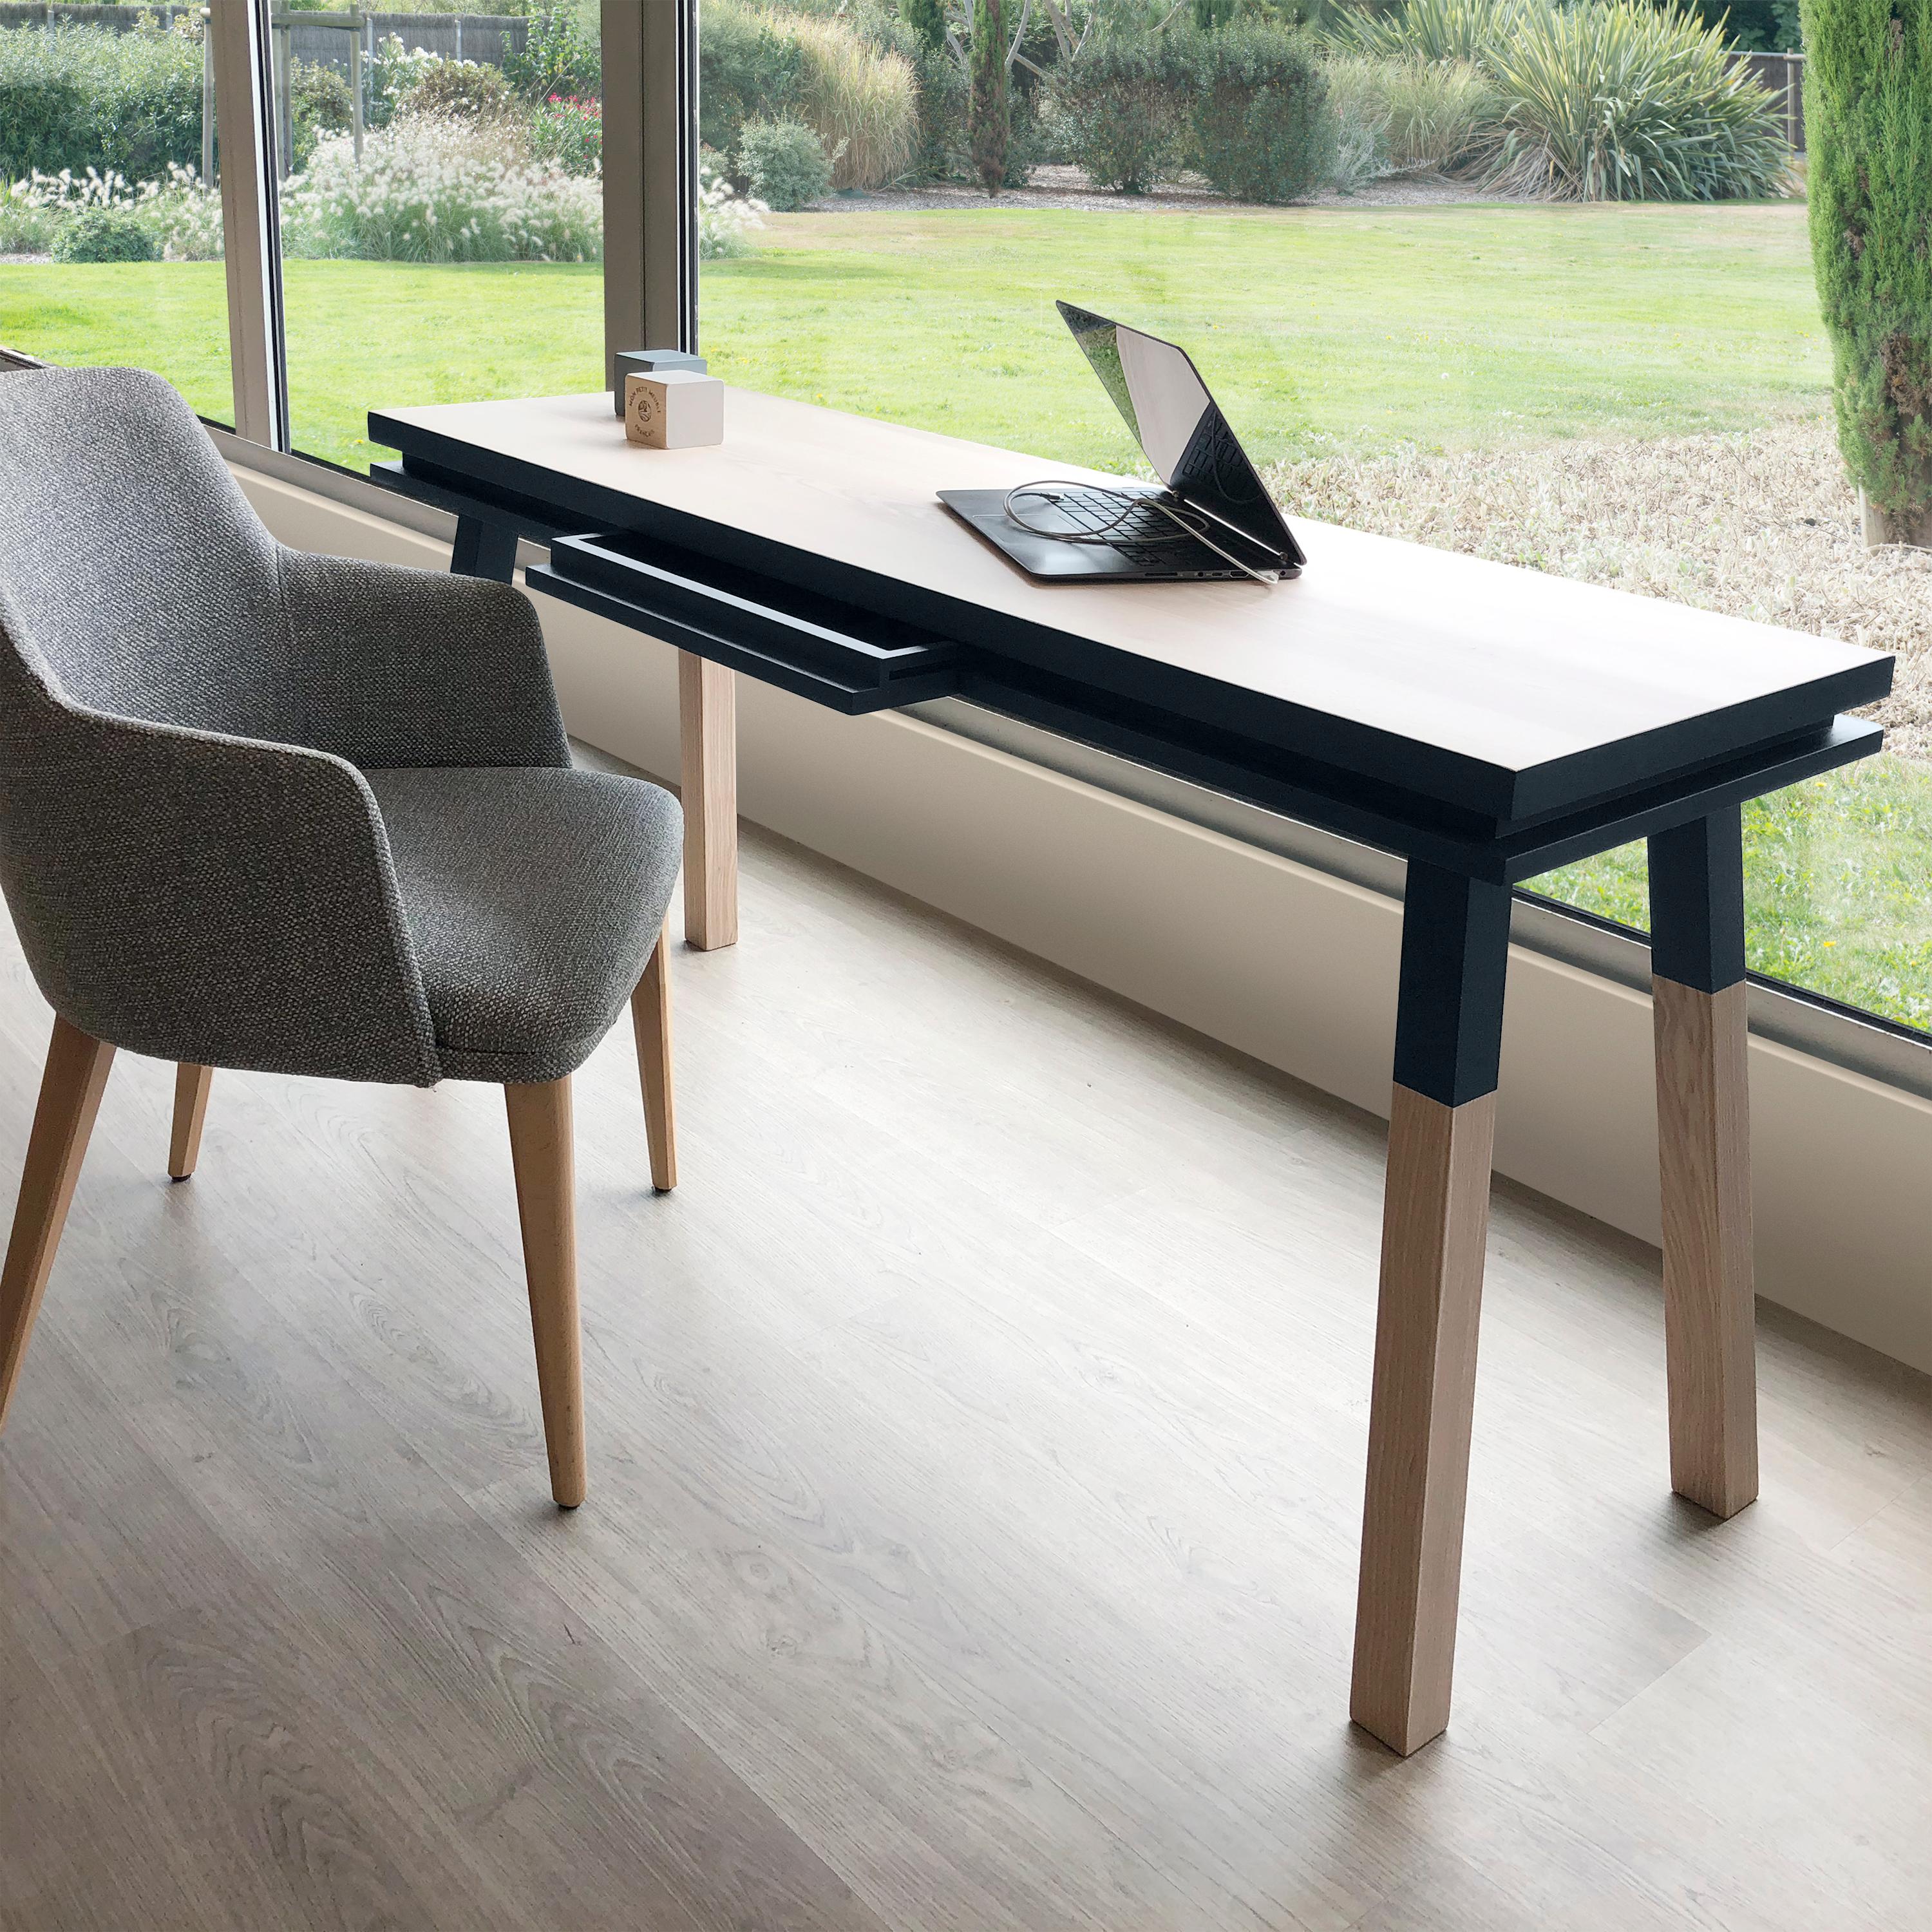 This dark blue rectangular console desk/table is designed by Eric Gizard in Paris. Eric is well know for its beautiful sleek design adapted for French craft brands and luxury groups. This desk is part of the ÉGÉE collection enhancing the refined